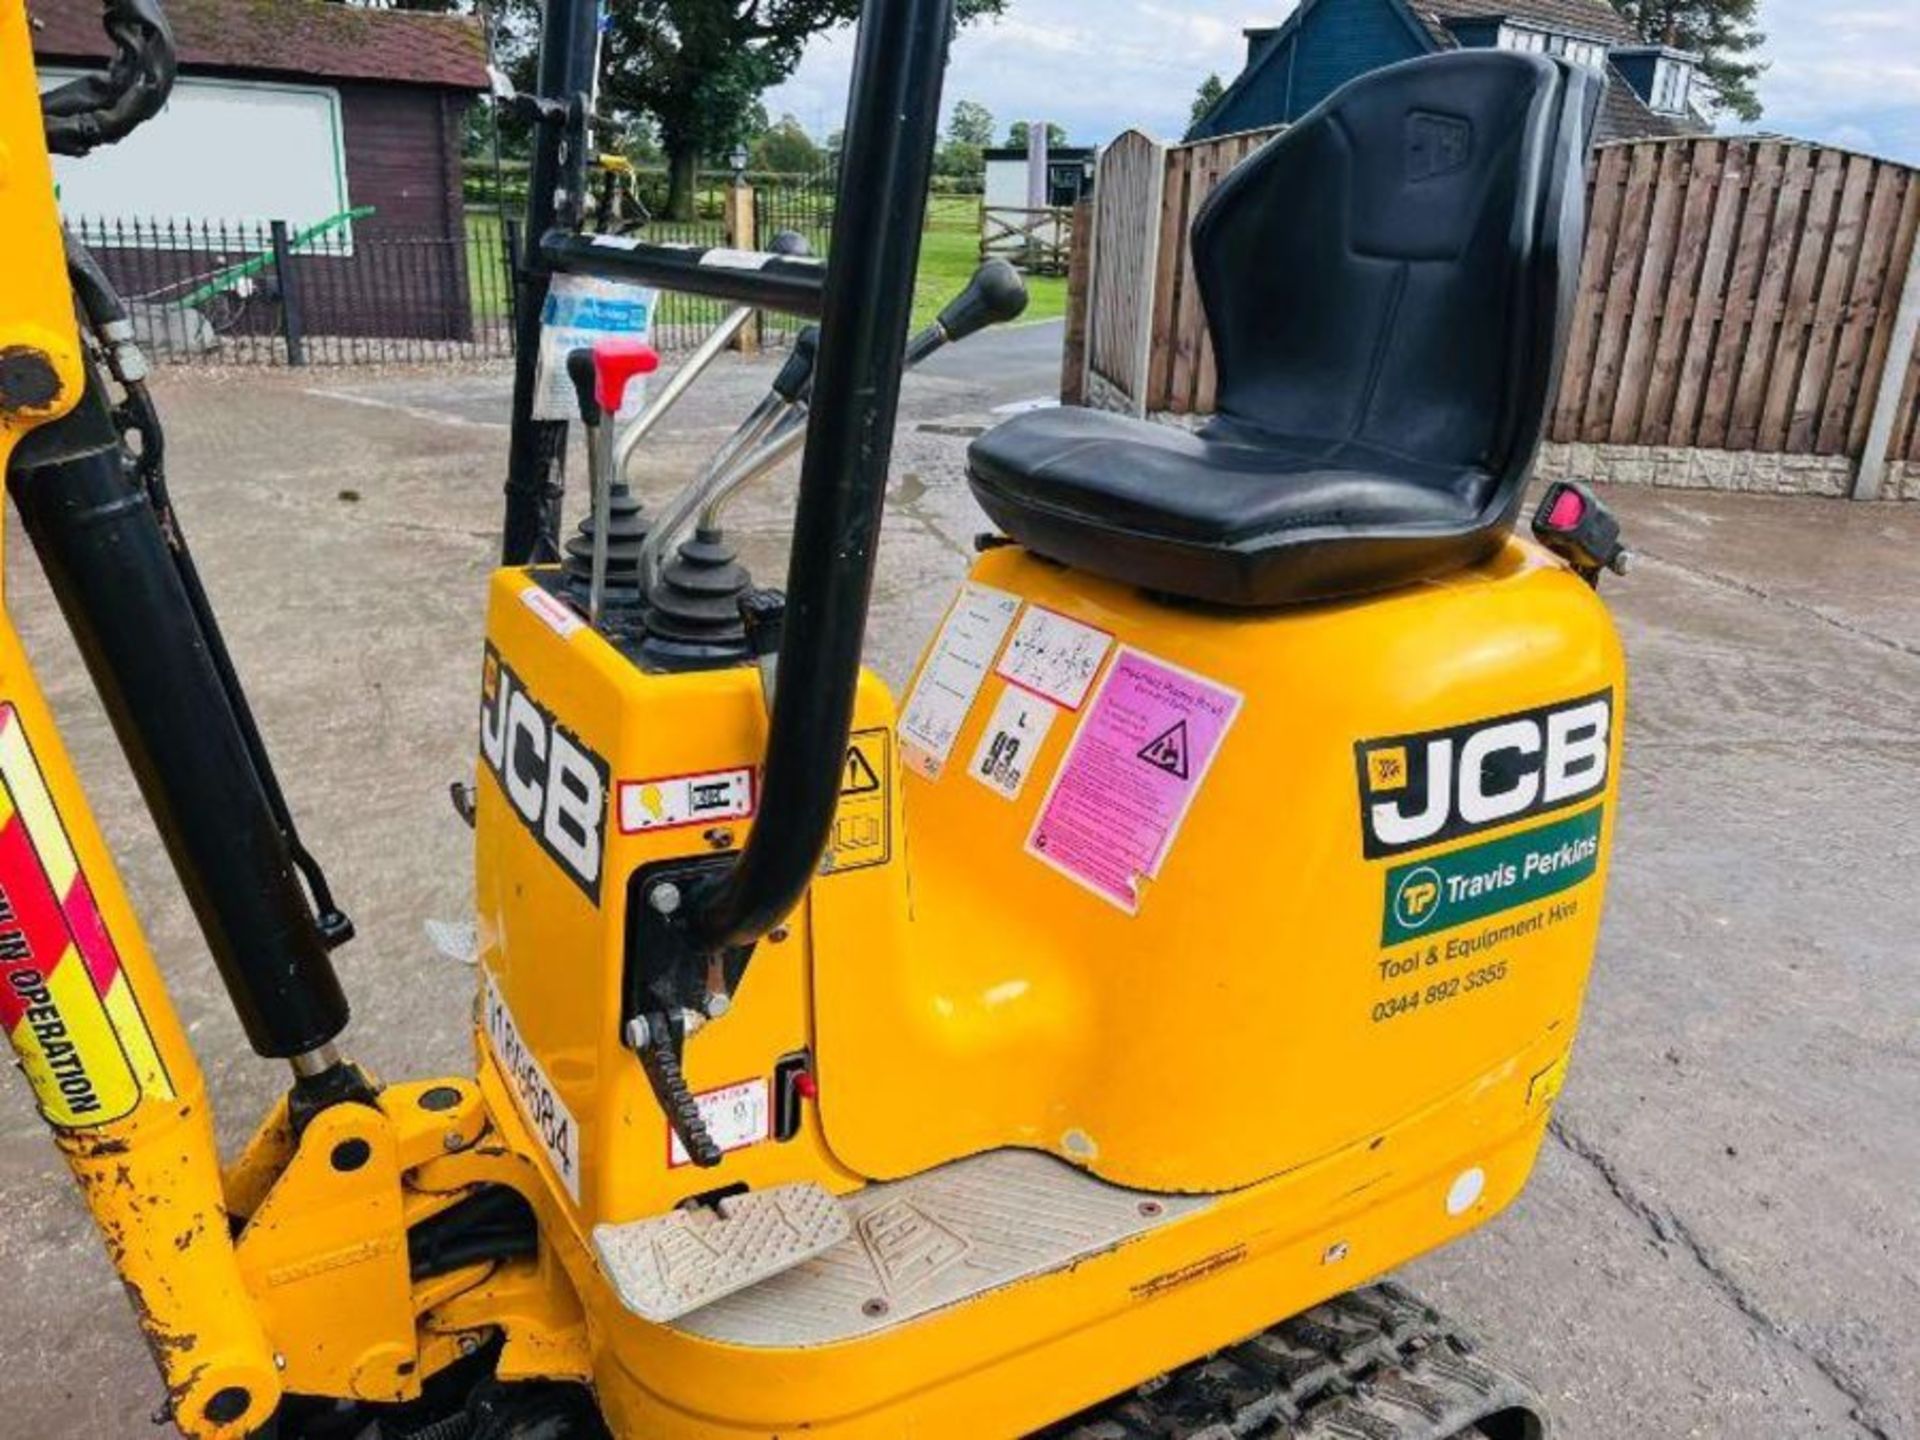 JCB MICRO DIGGER *YEAR 2019, ONLY 338 HOURS* C/W EXPANDING TRACKS - Image 10 of 16